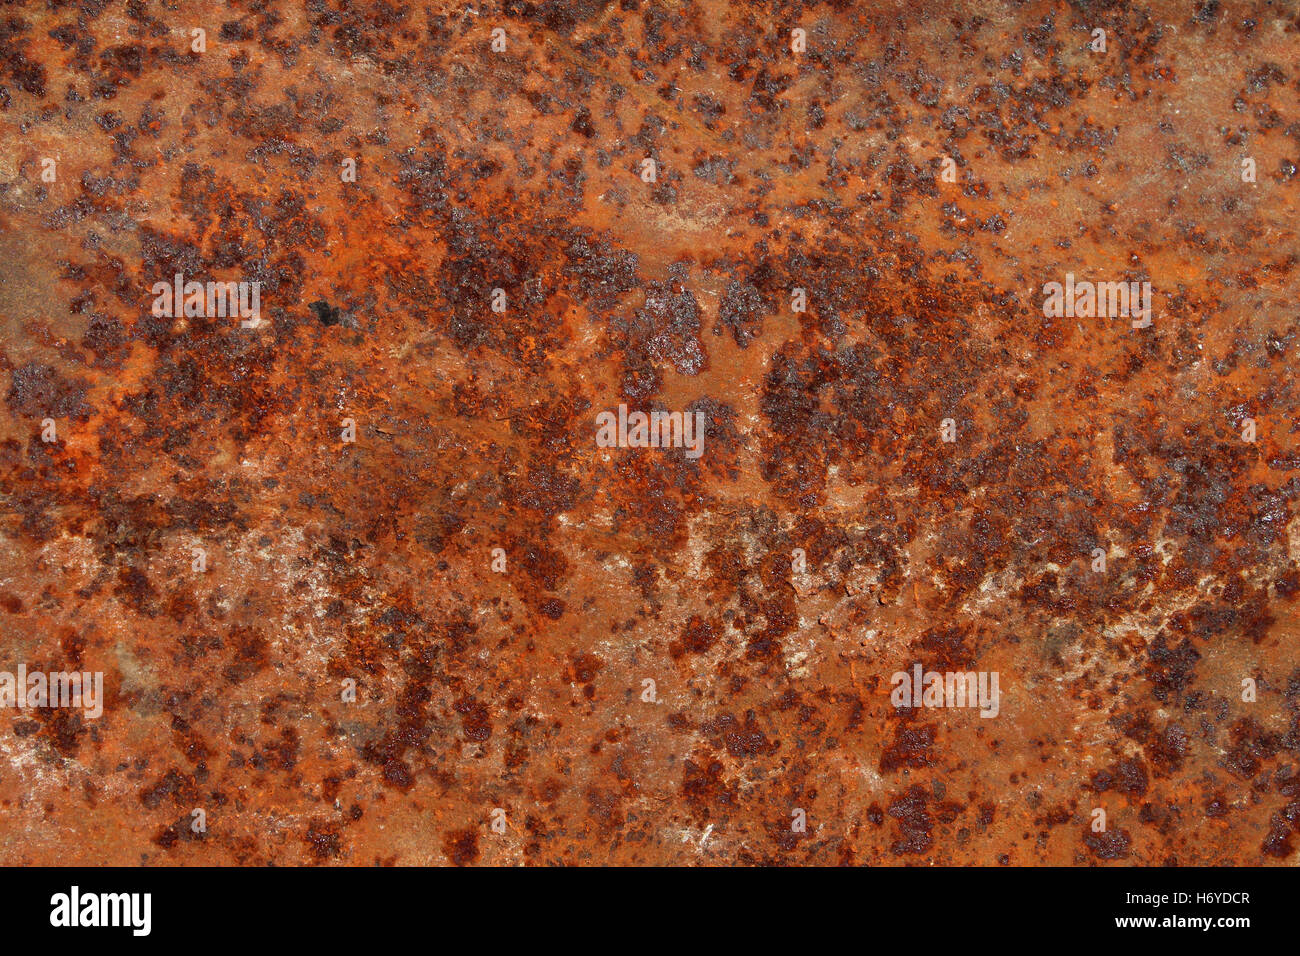 rust background as an abstract texture representing decay and weathering as an oxidized iron element. Stock Photo